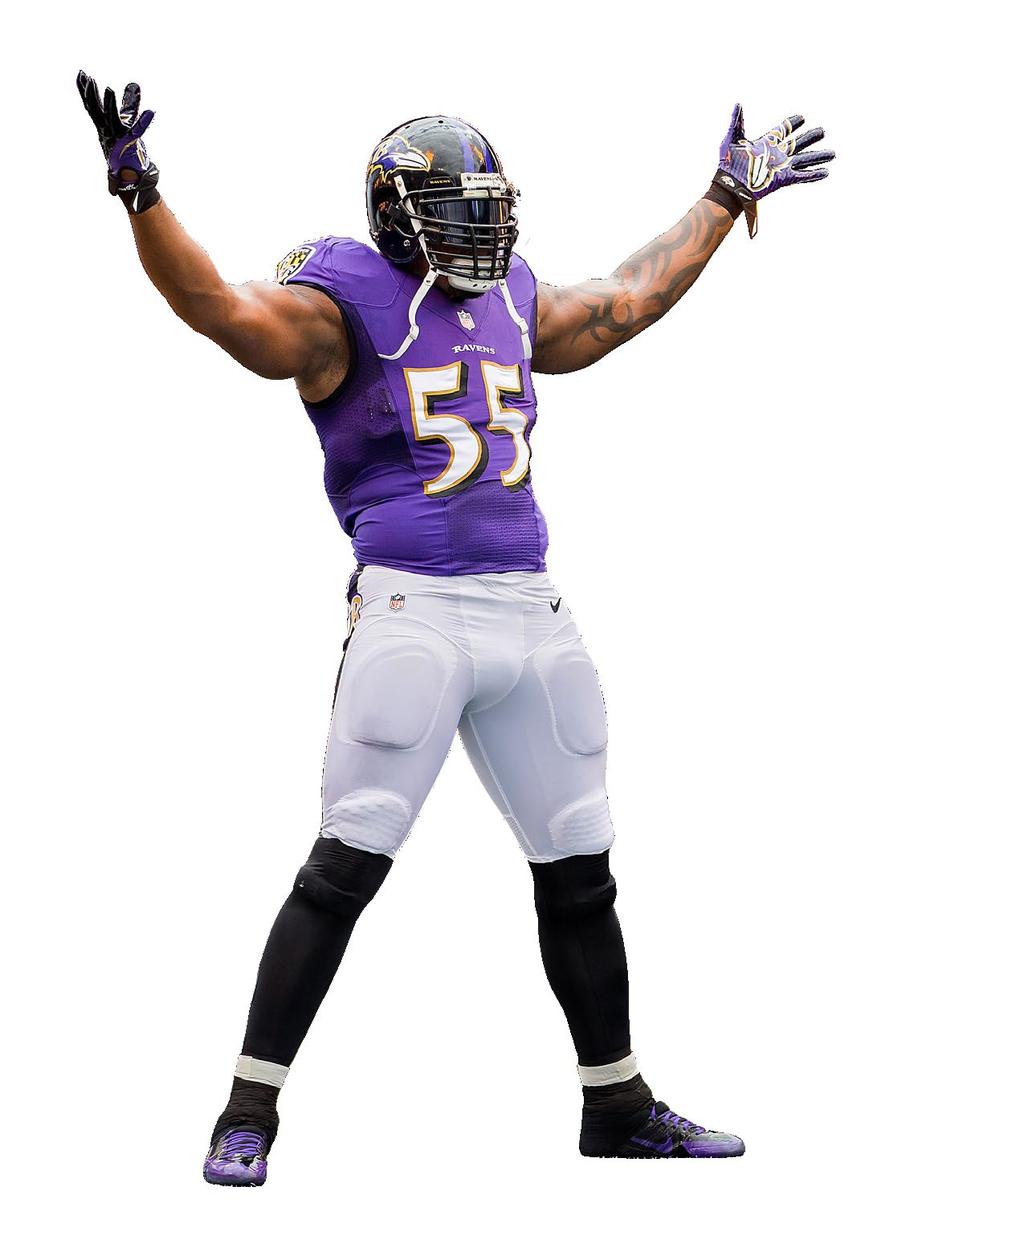 2 in career Ravens tackles (904). RAVENS ALL-TIME SACKS Rk. Player (Years) Sacks 1. Terrell Suggs (2003-17) 125.5 2. Peter Boulware (1997-2005) 70.0 3. Michael McCrary (1997-2002) 51.0 4.